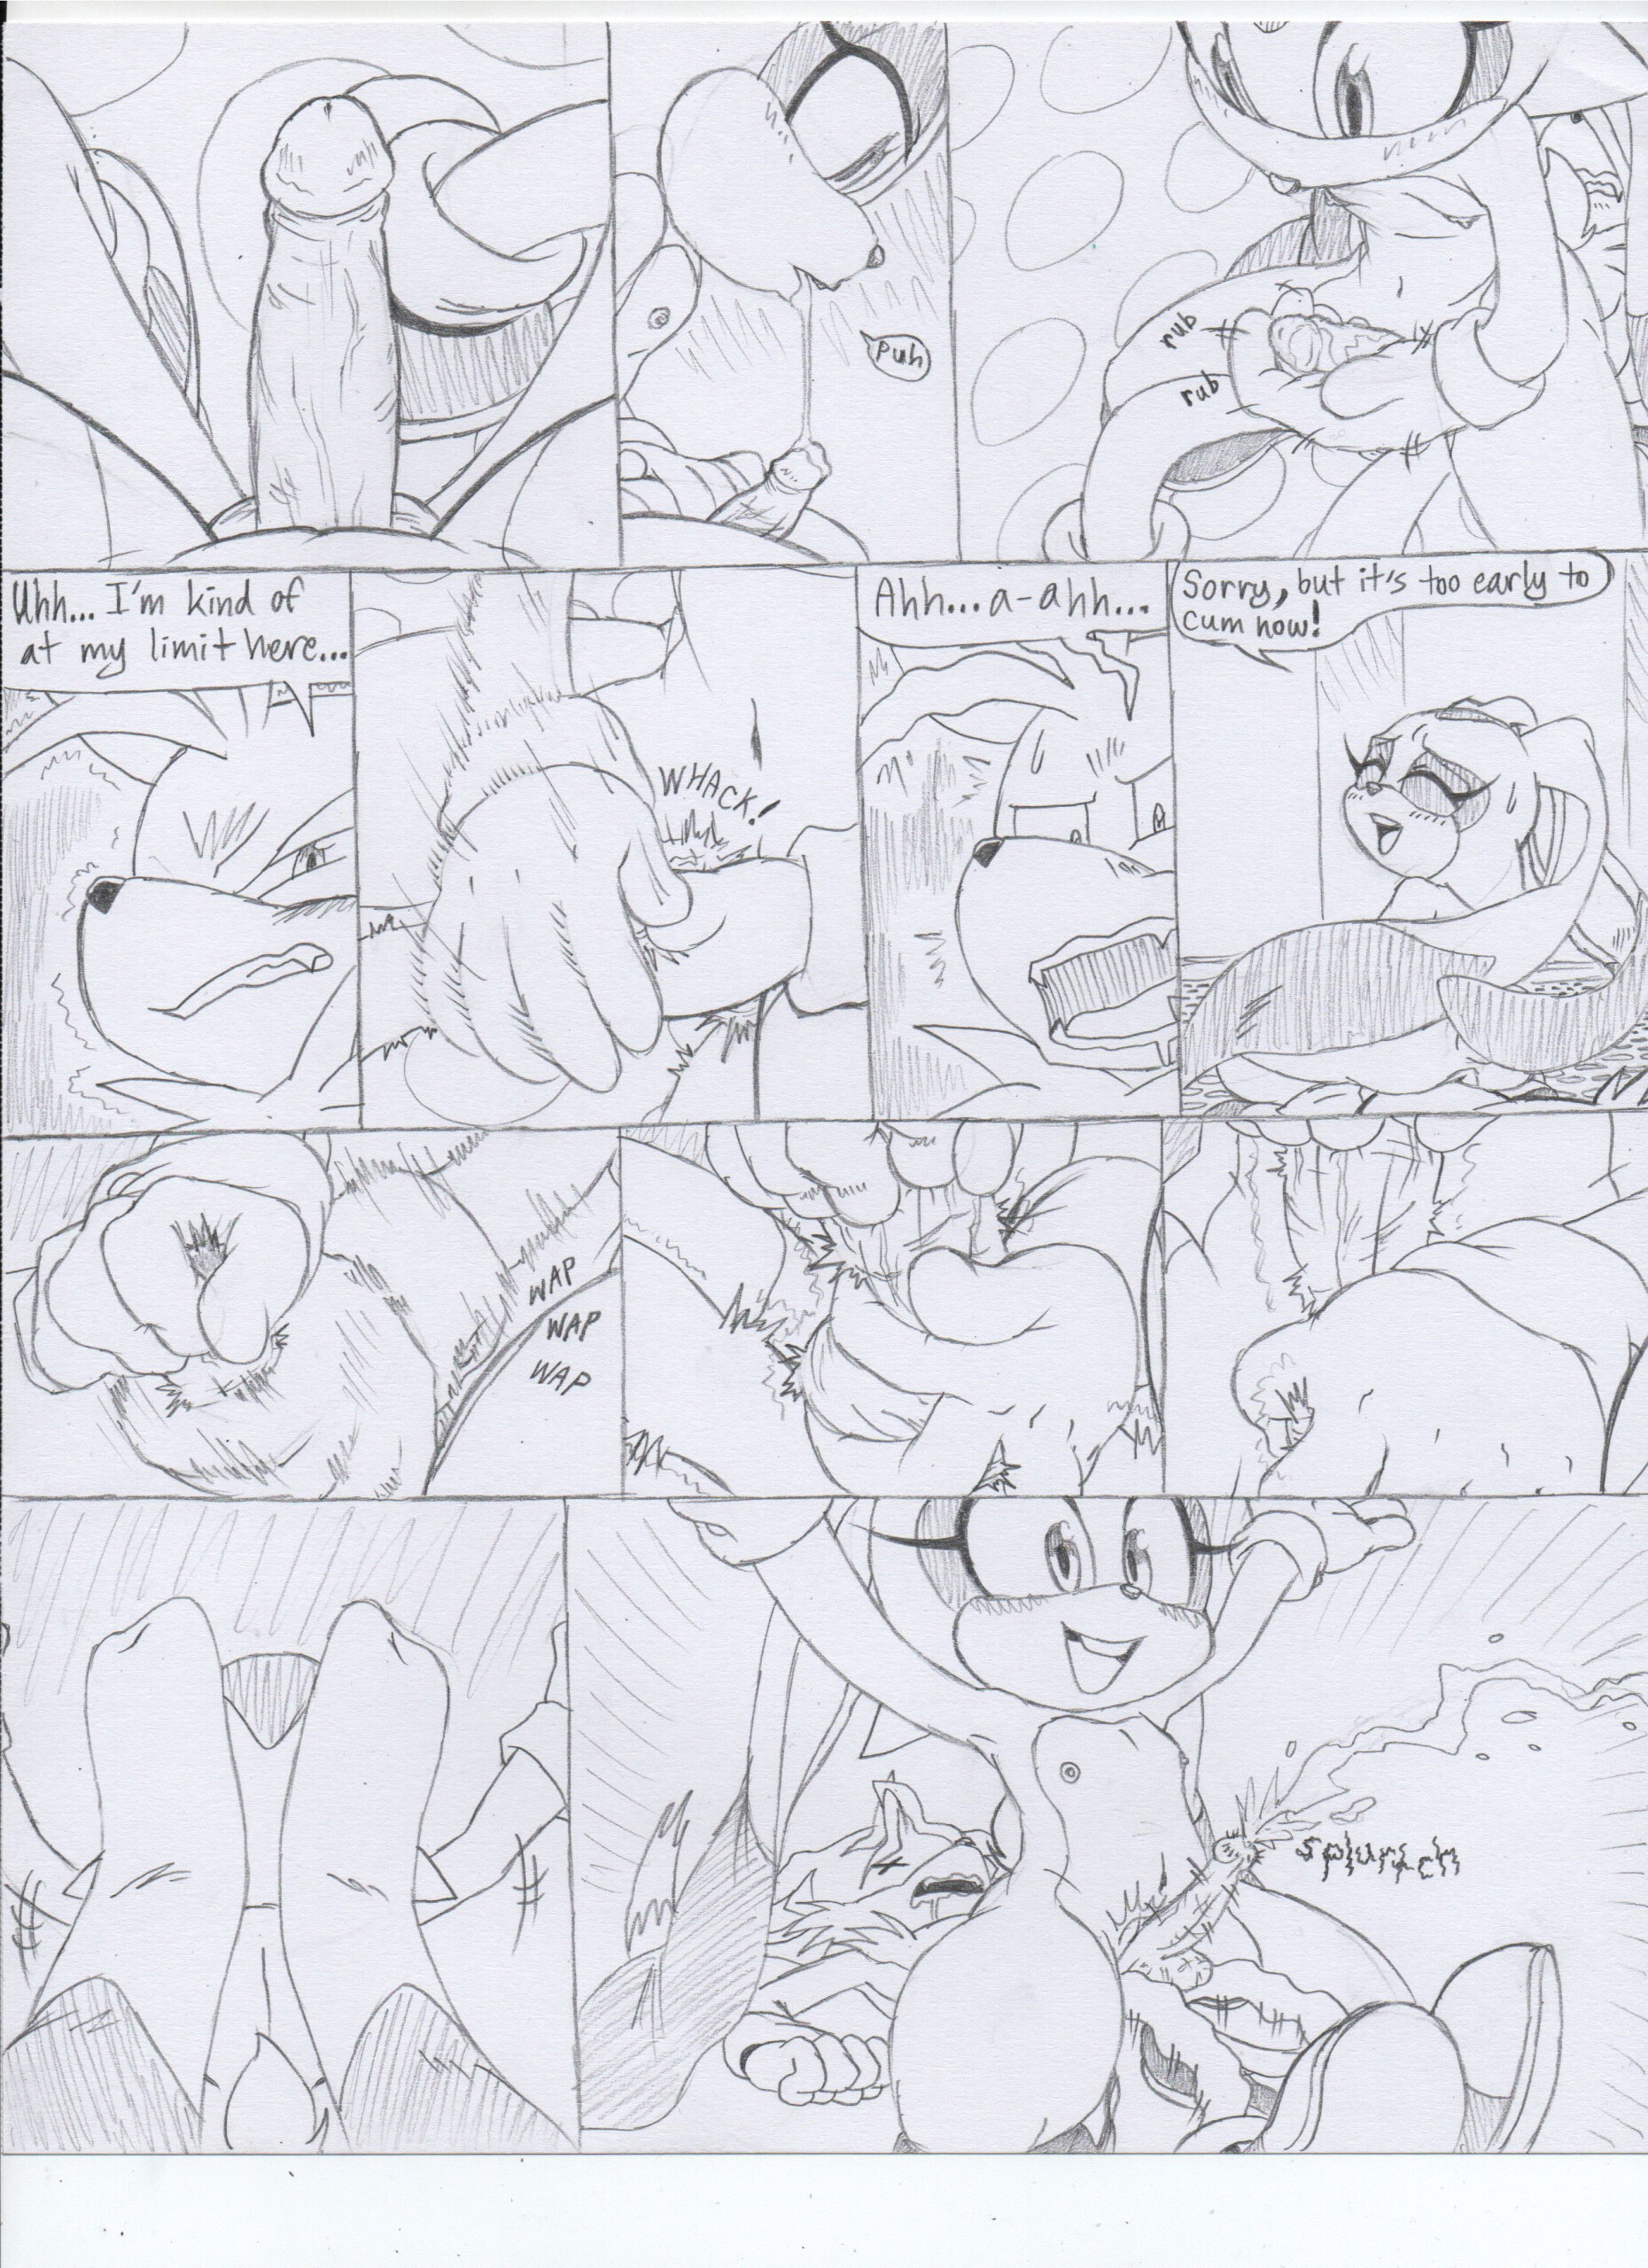 Cream x Tails - Page 3